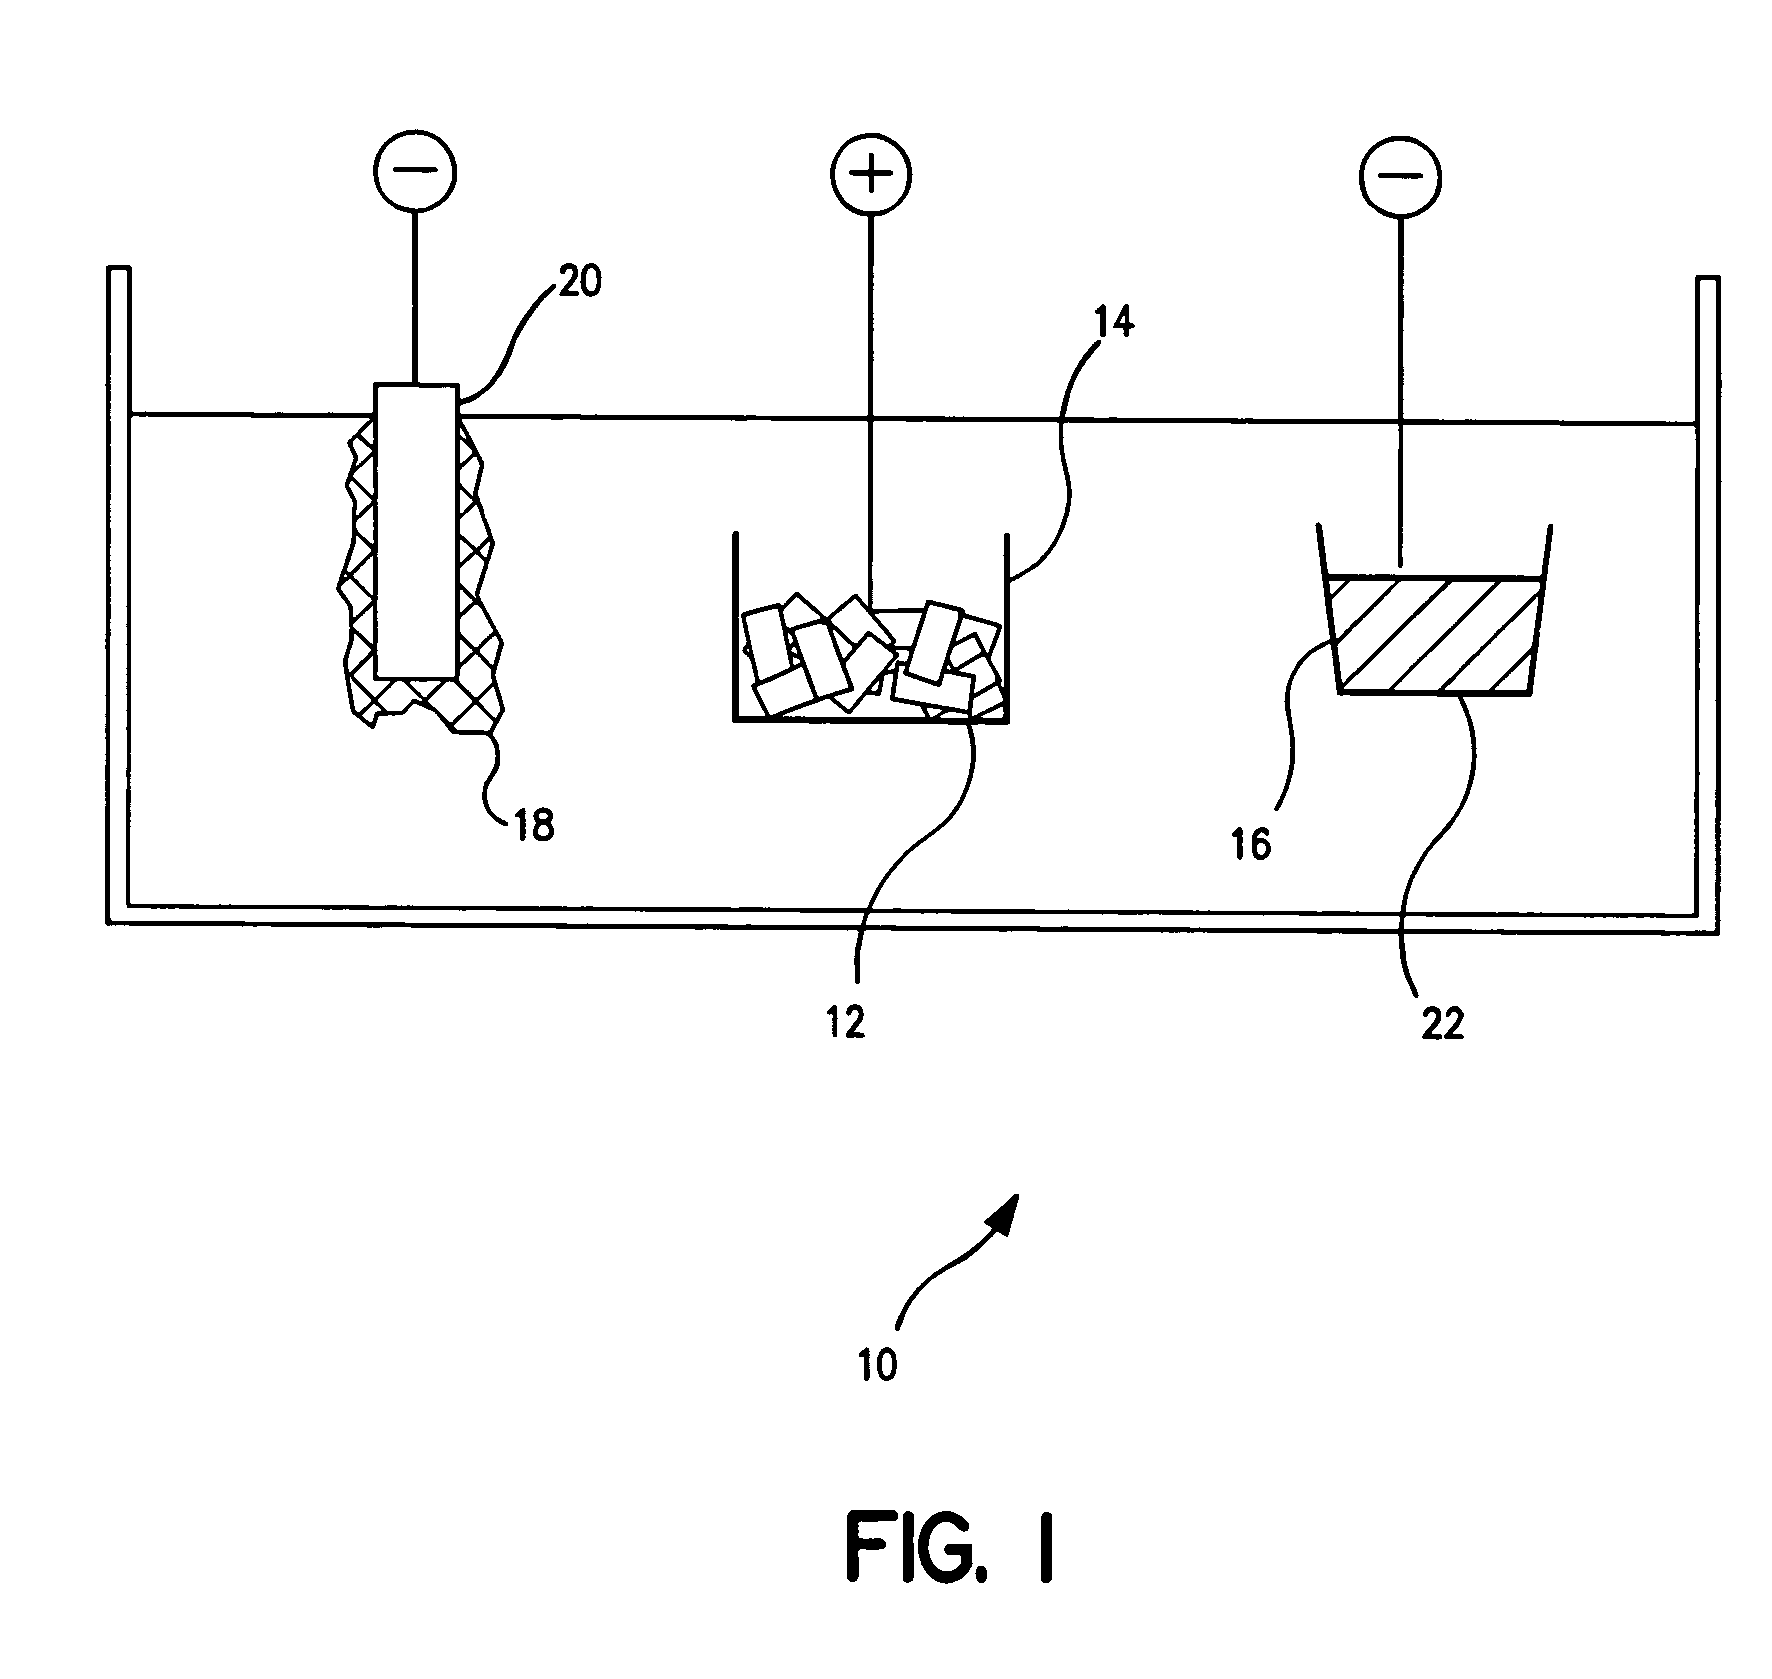 Porous membrane electrochemical cell for uranium and transuranic recovery from molten salt electrolyte